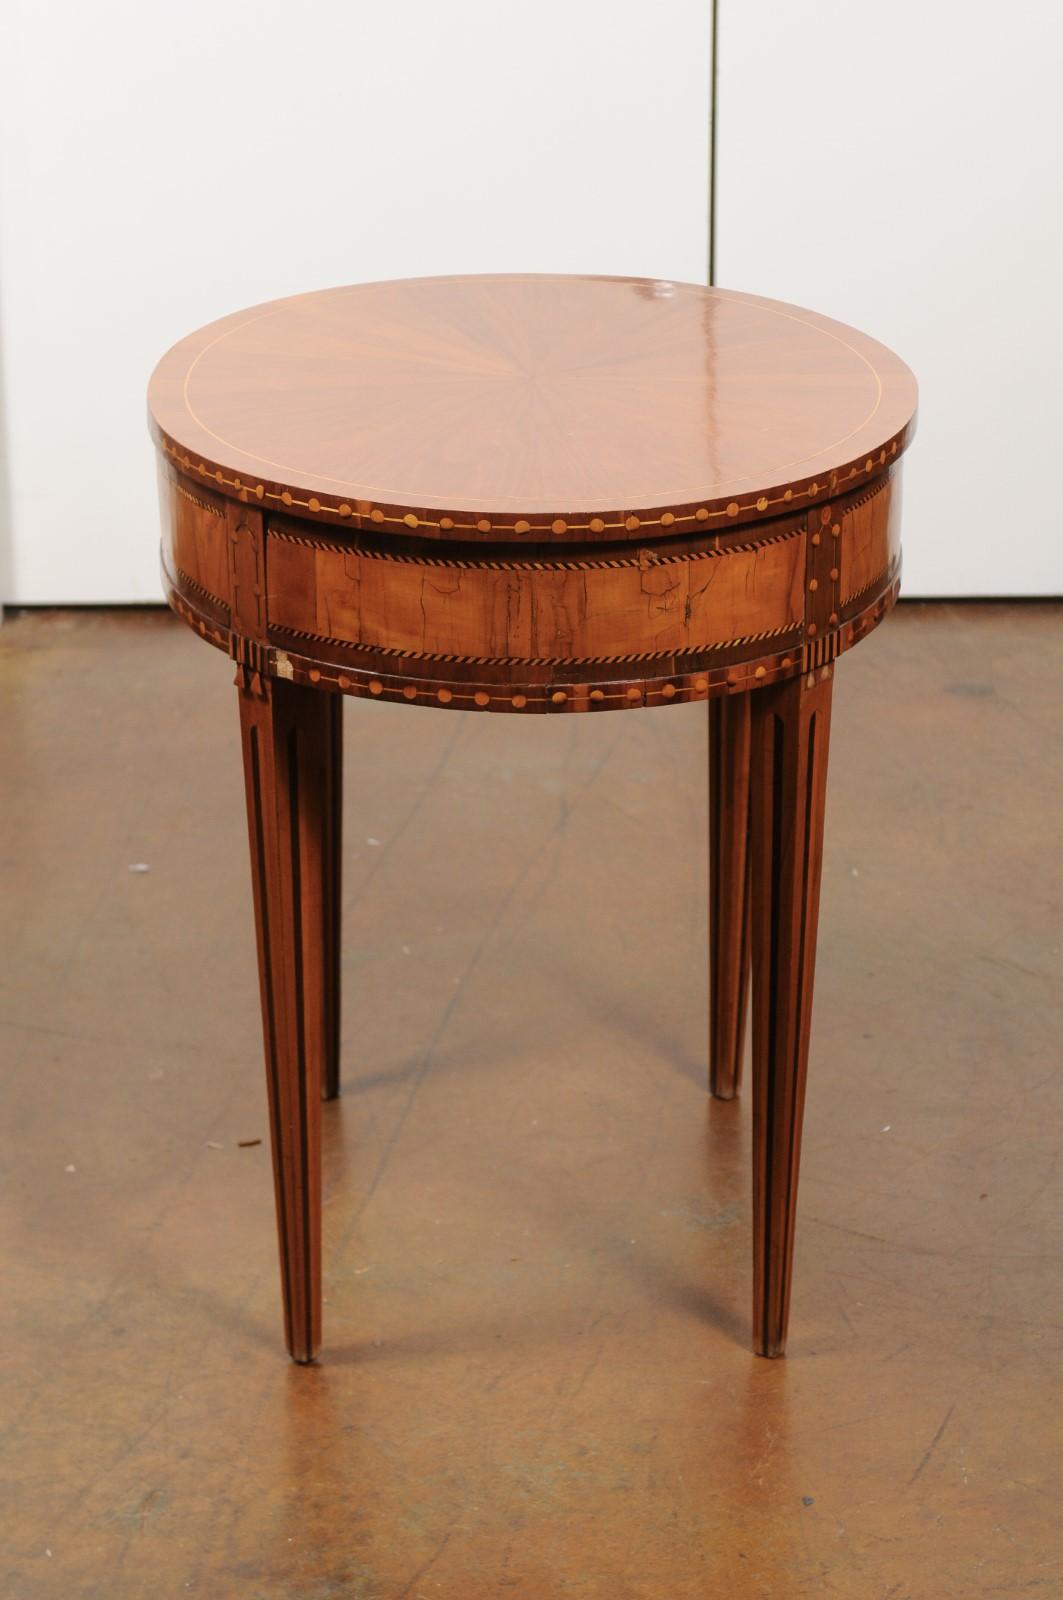 French 19th Century Oval Walnut and Satinwood Inlaid Table with Radiating Veneer 2